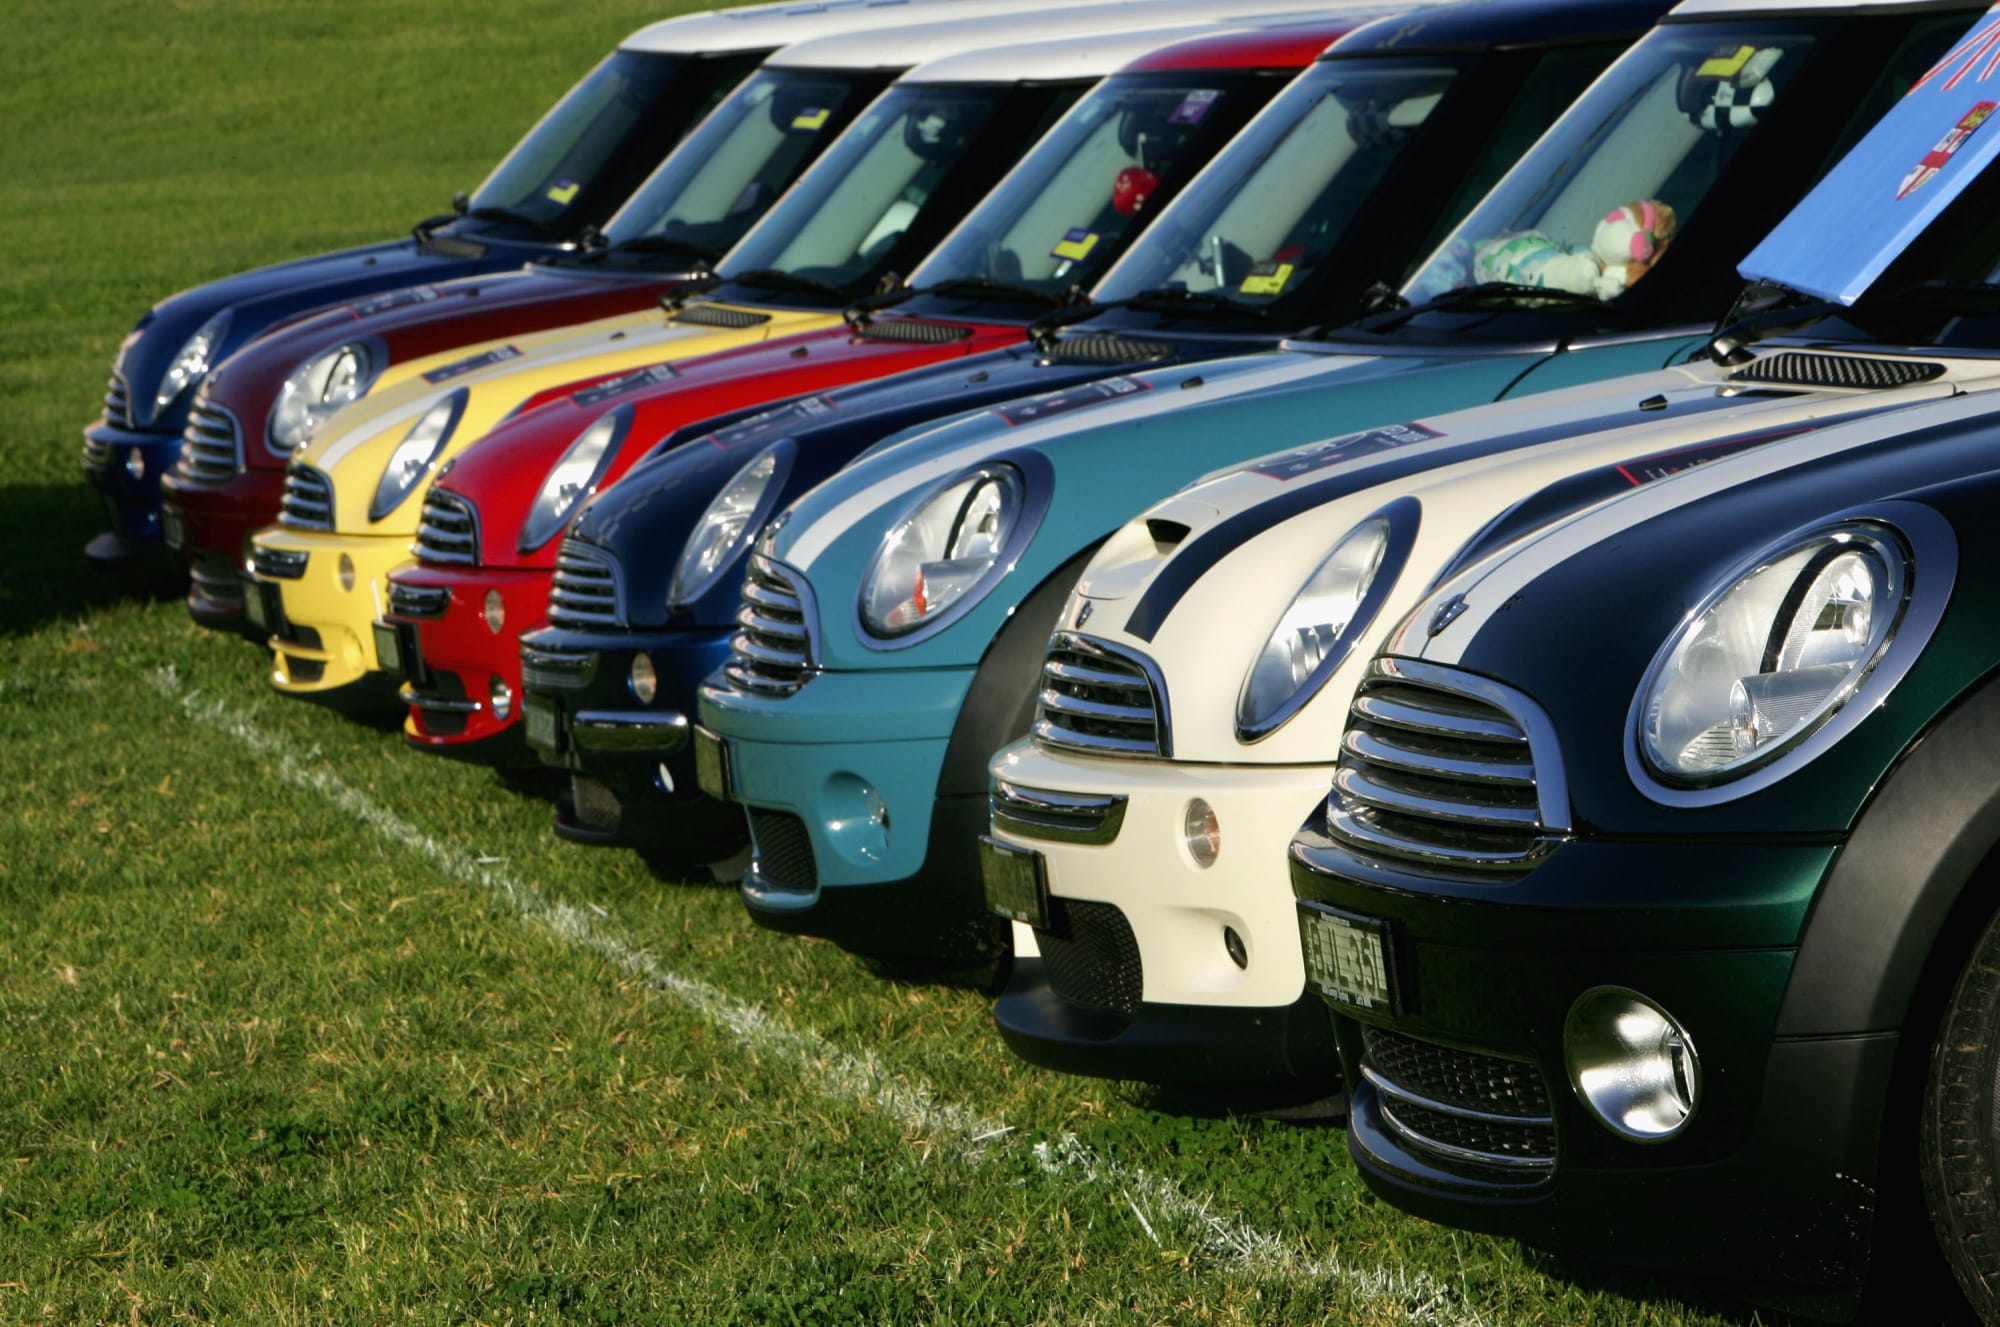 Mini Cooper Adds Customization With 3D Printed Parts